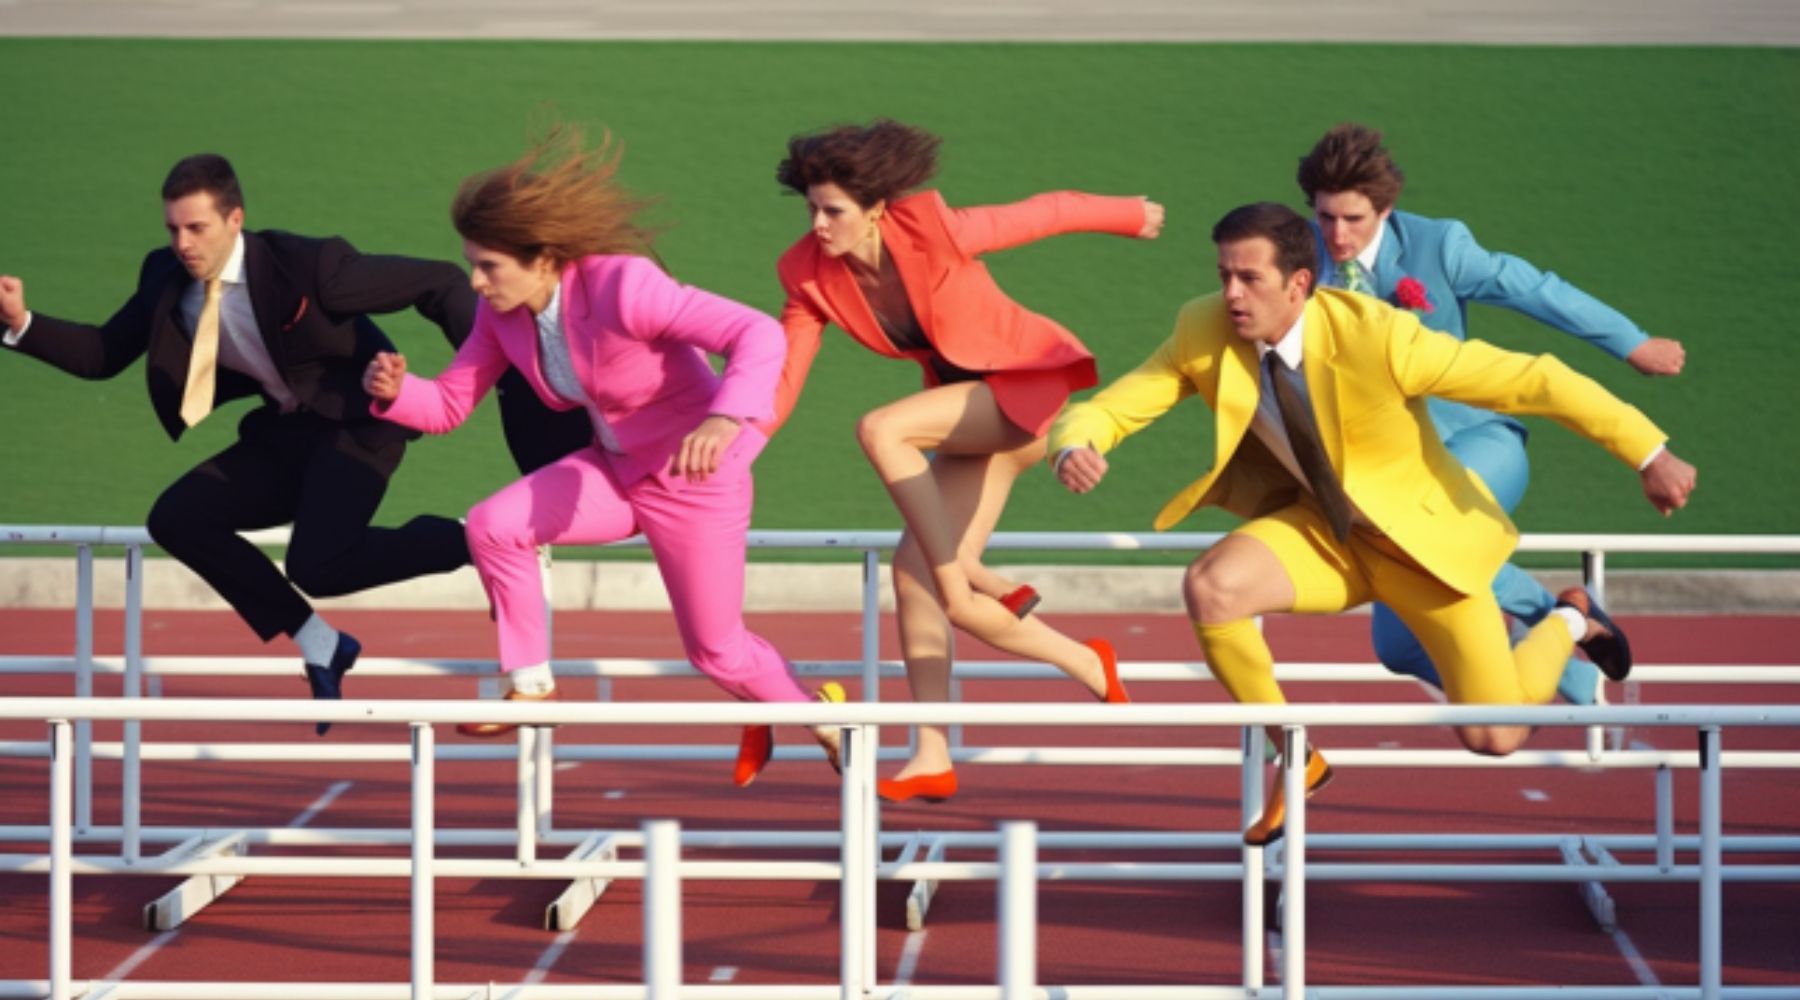 A group of people in colorful outfit jumping over barriers